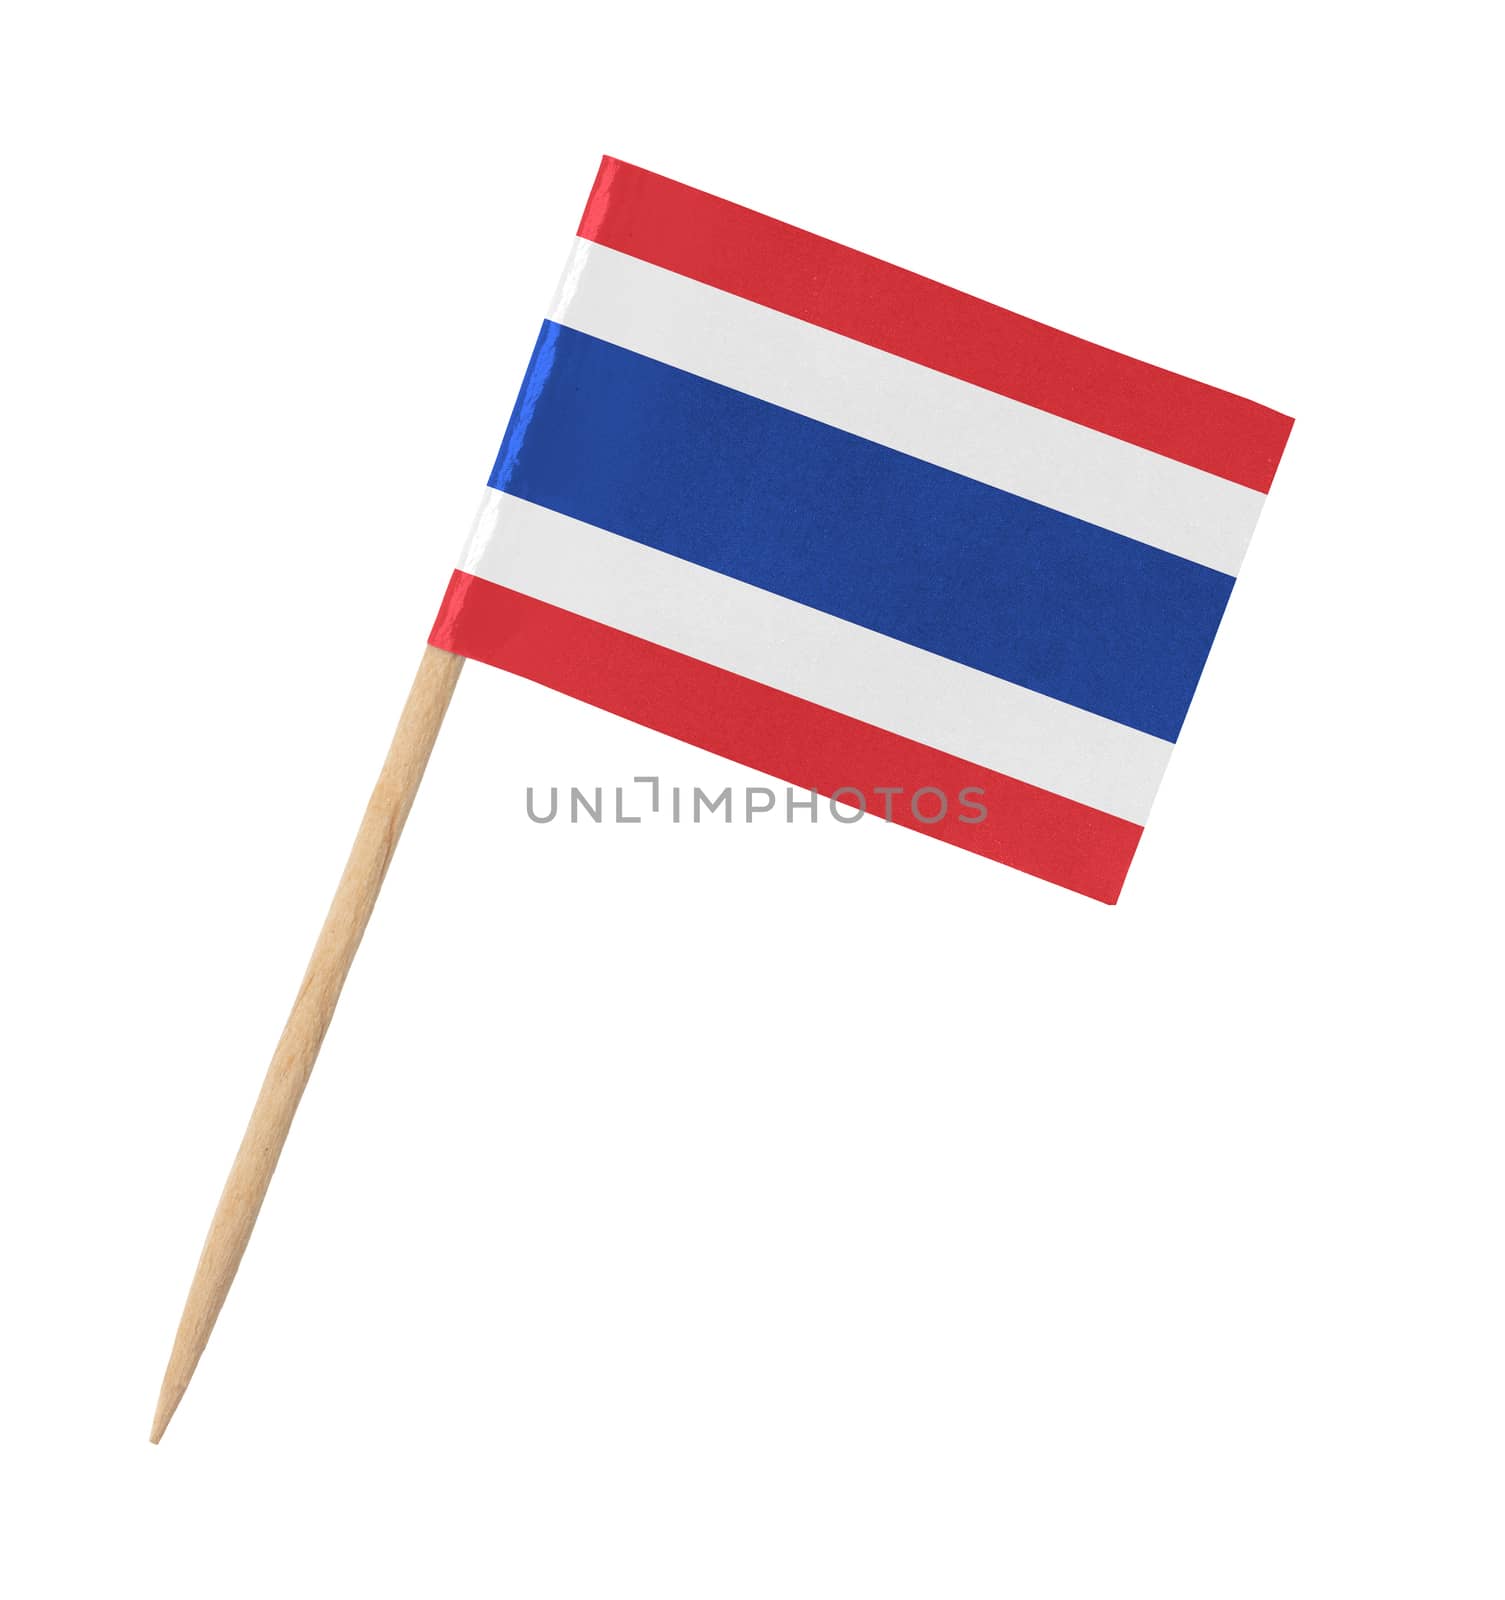 Small paper Thai flag on wooden stick by michaklootwijk